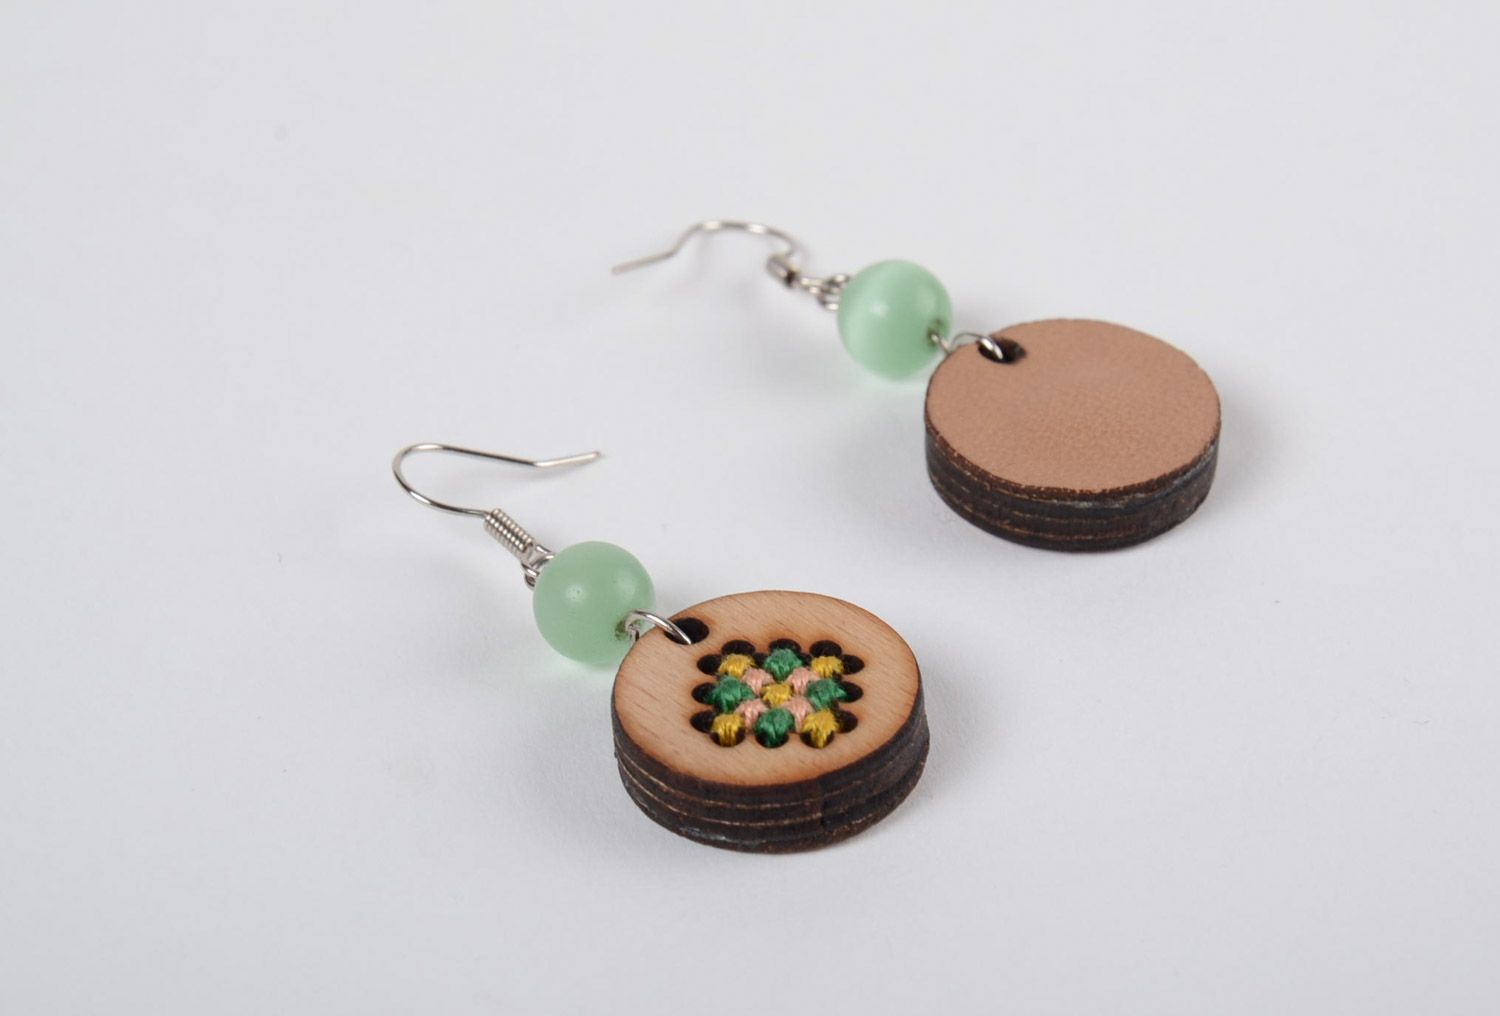 Handmade plywood earrings with cross stitch embroidery and beads in ethnic style photo 4